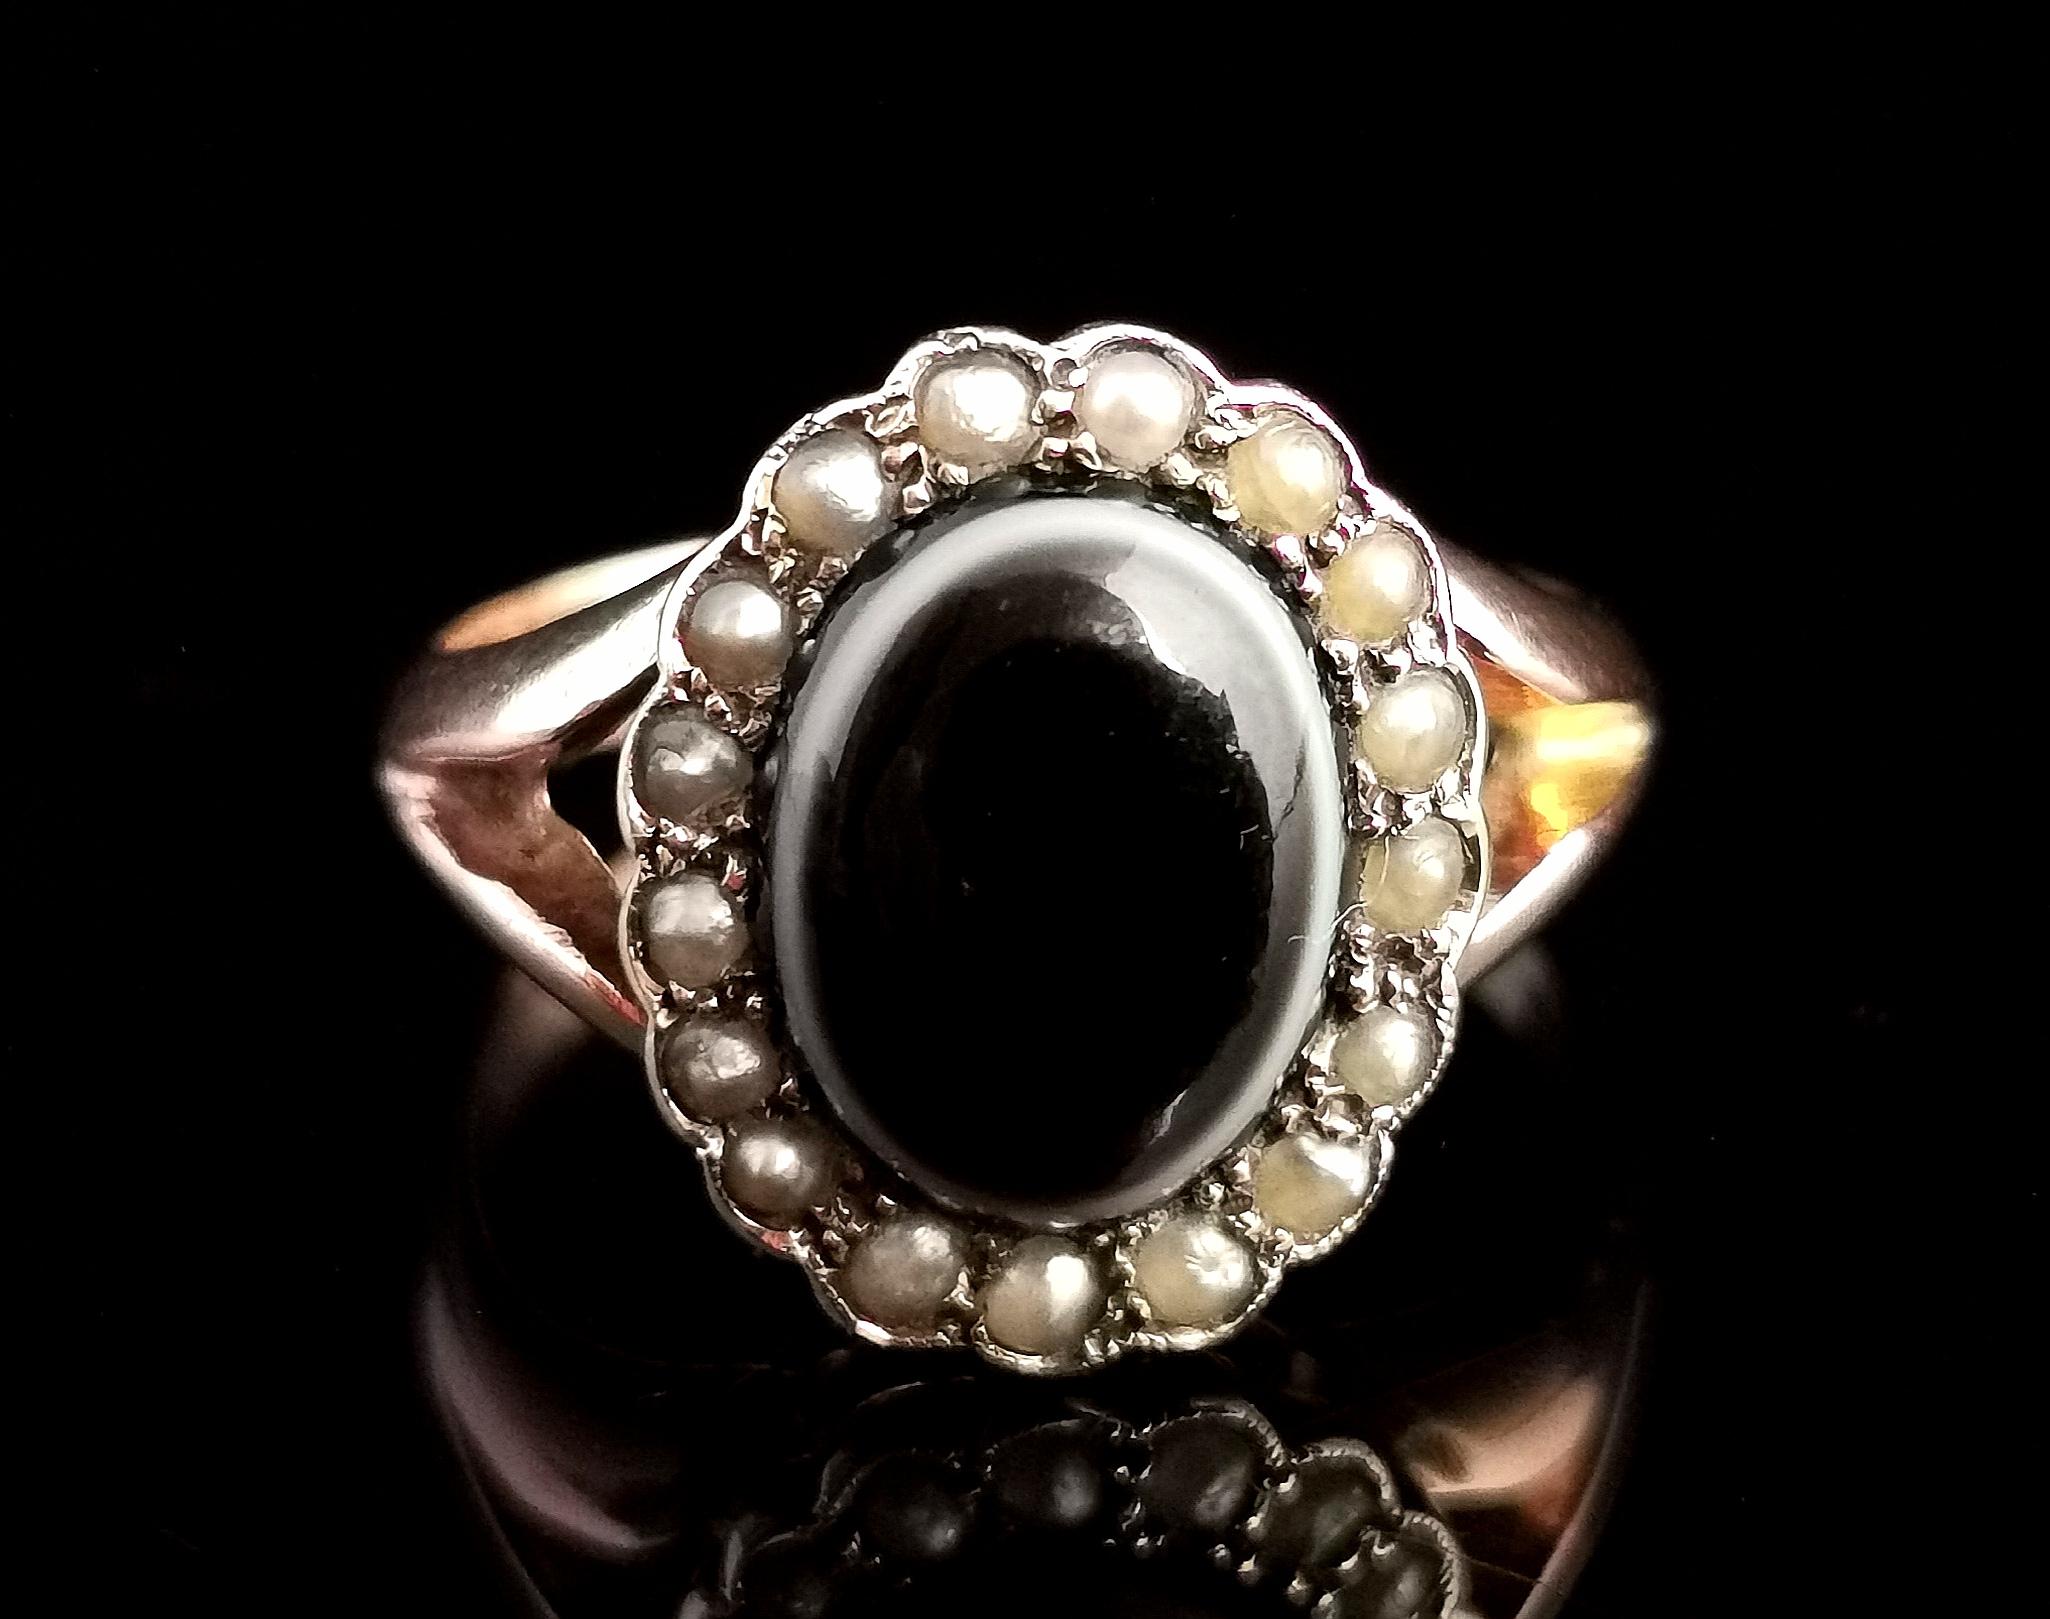 A beautiful antique early Art Deco era mourning ring

It features a central oval bullseye agate cabochon in Black with white and brown banding surrounded by a halo of creamy seed pearls.

It has chunky smooth polished band with a slight D